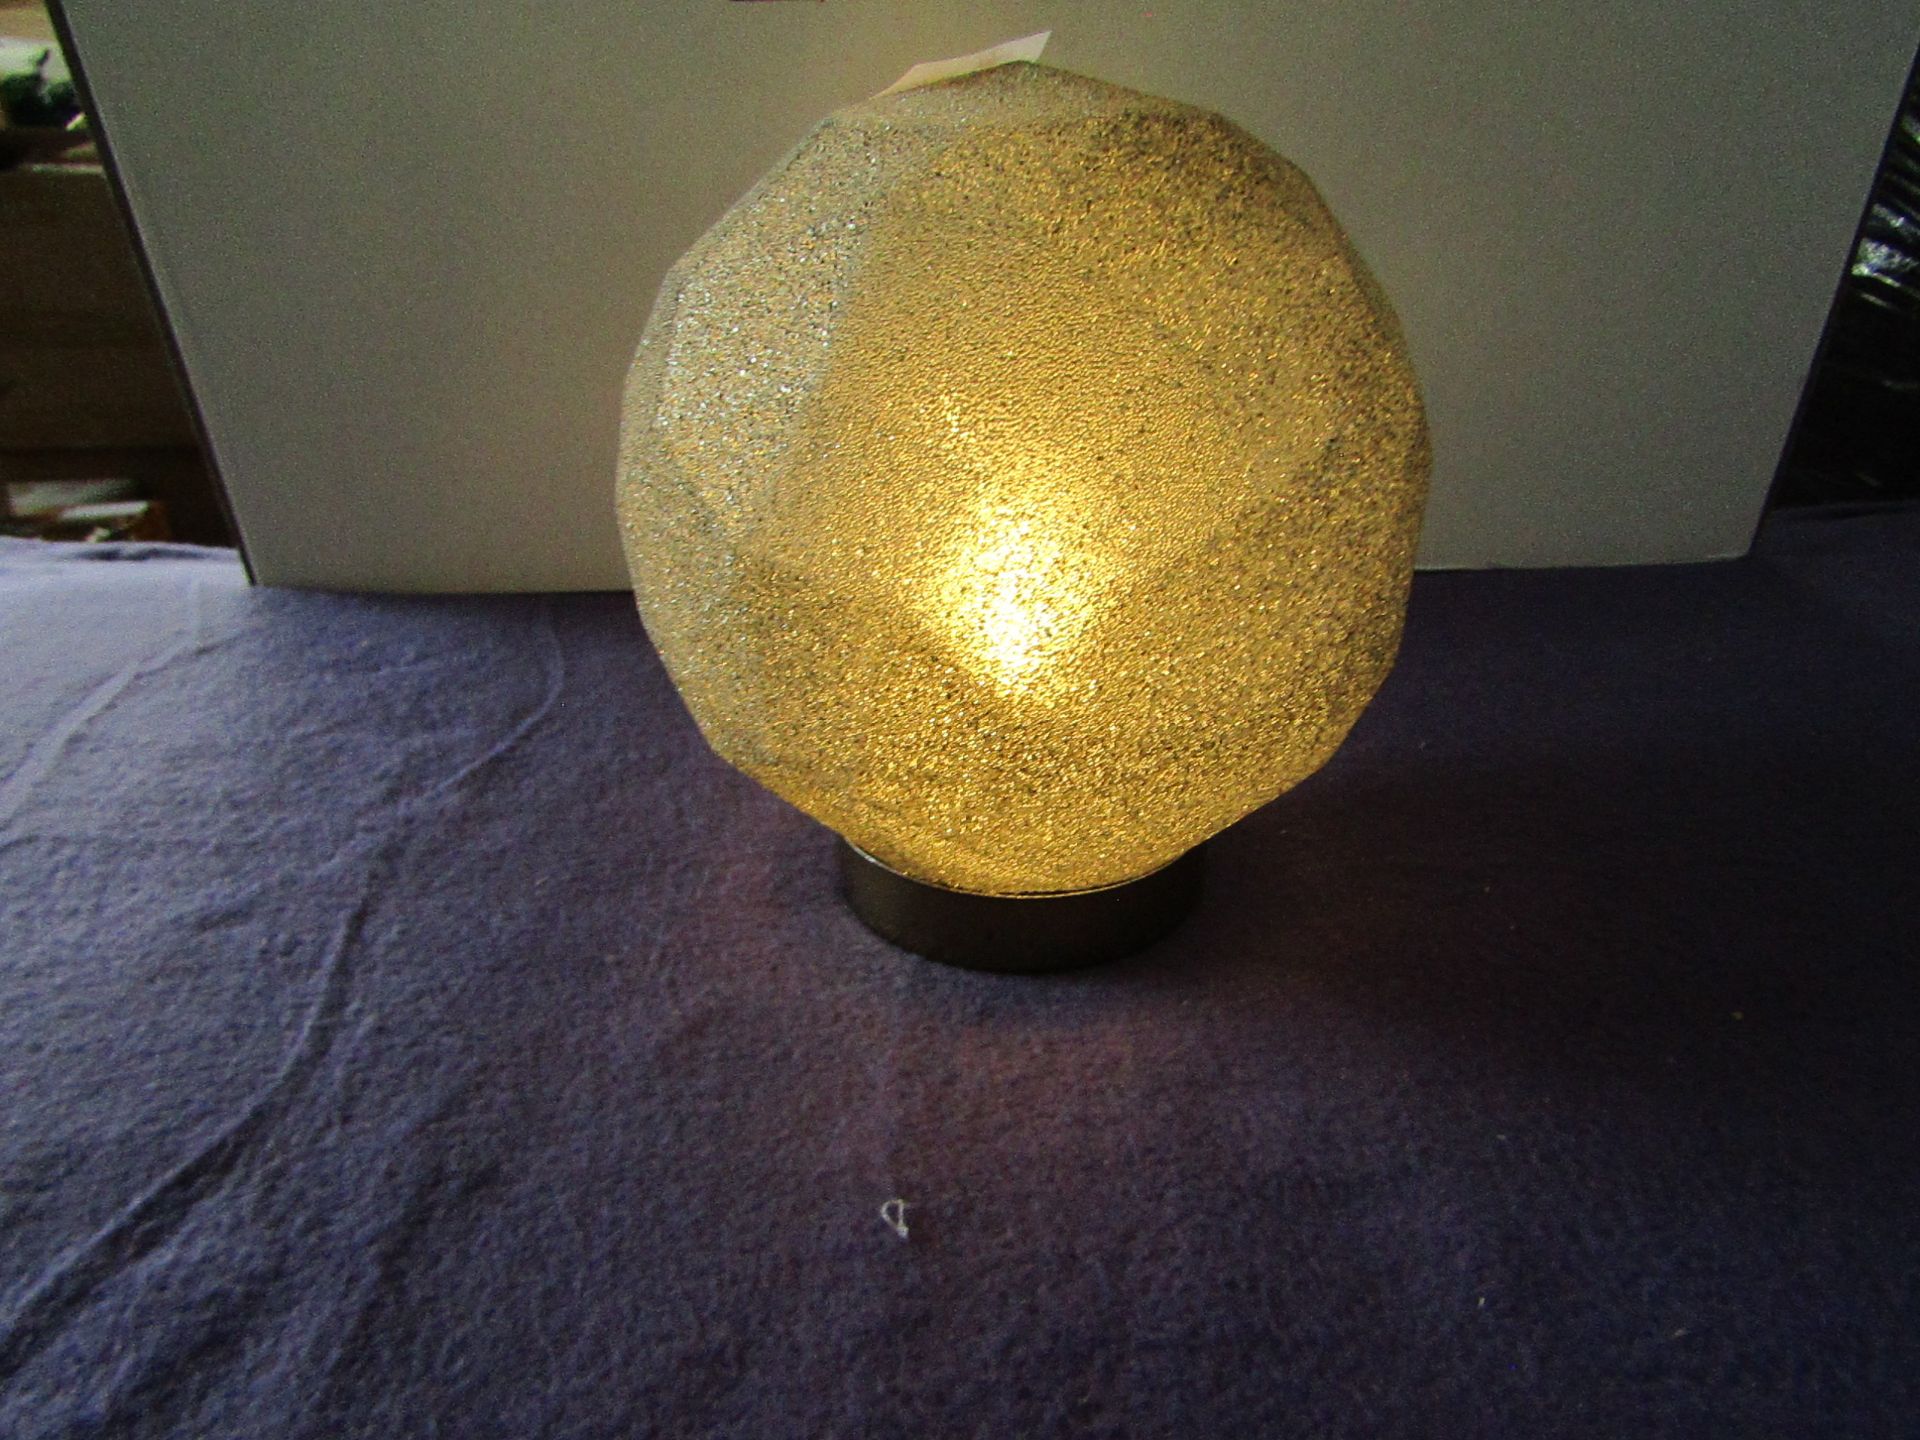 Rowen Group Kooper Grey & Gold LED Table Lamp RRP Â£29.00 - This item looks to be in good